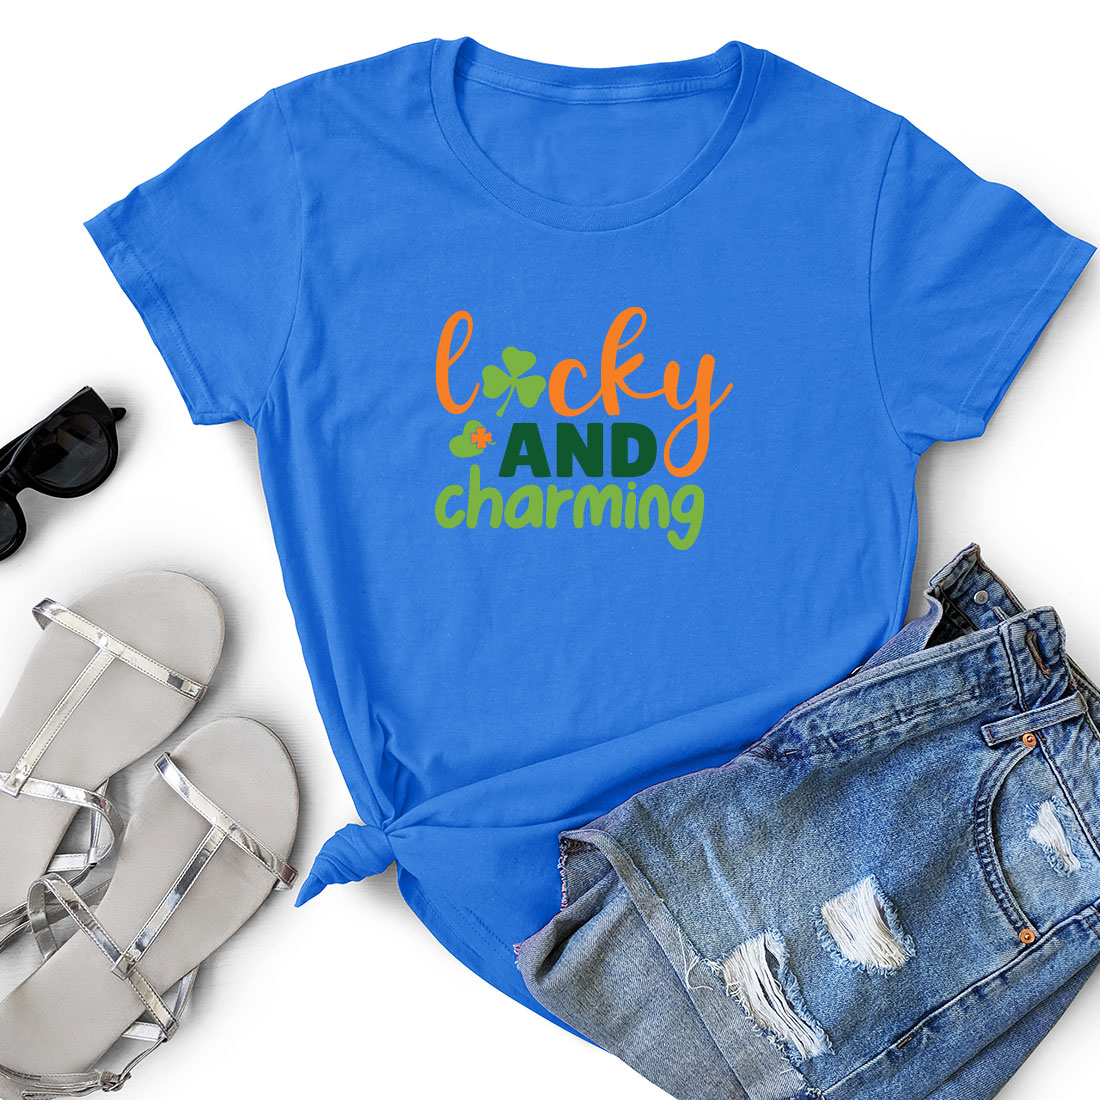 T - shirt that says cheeky and crayon next to a pair.